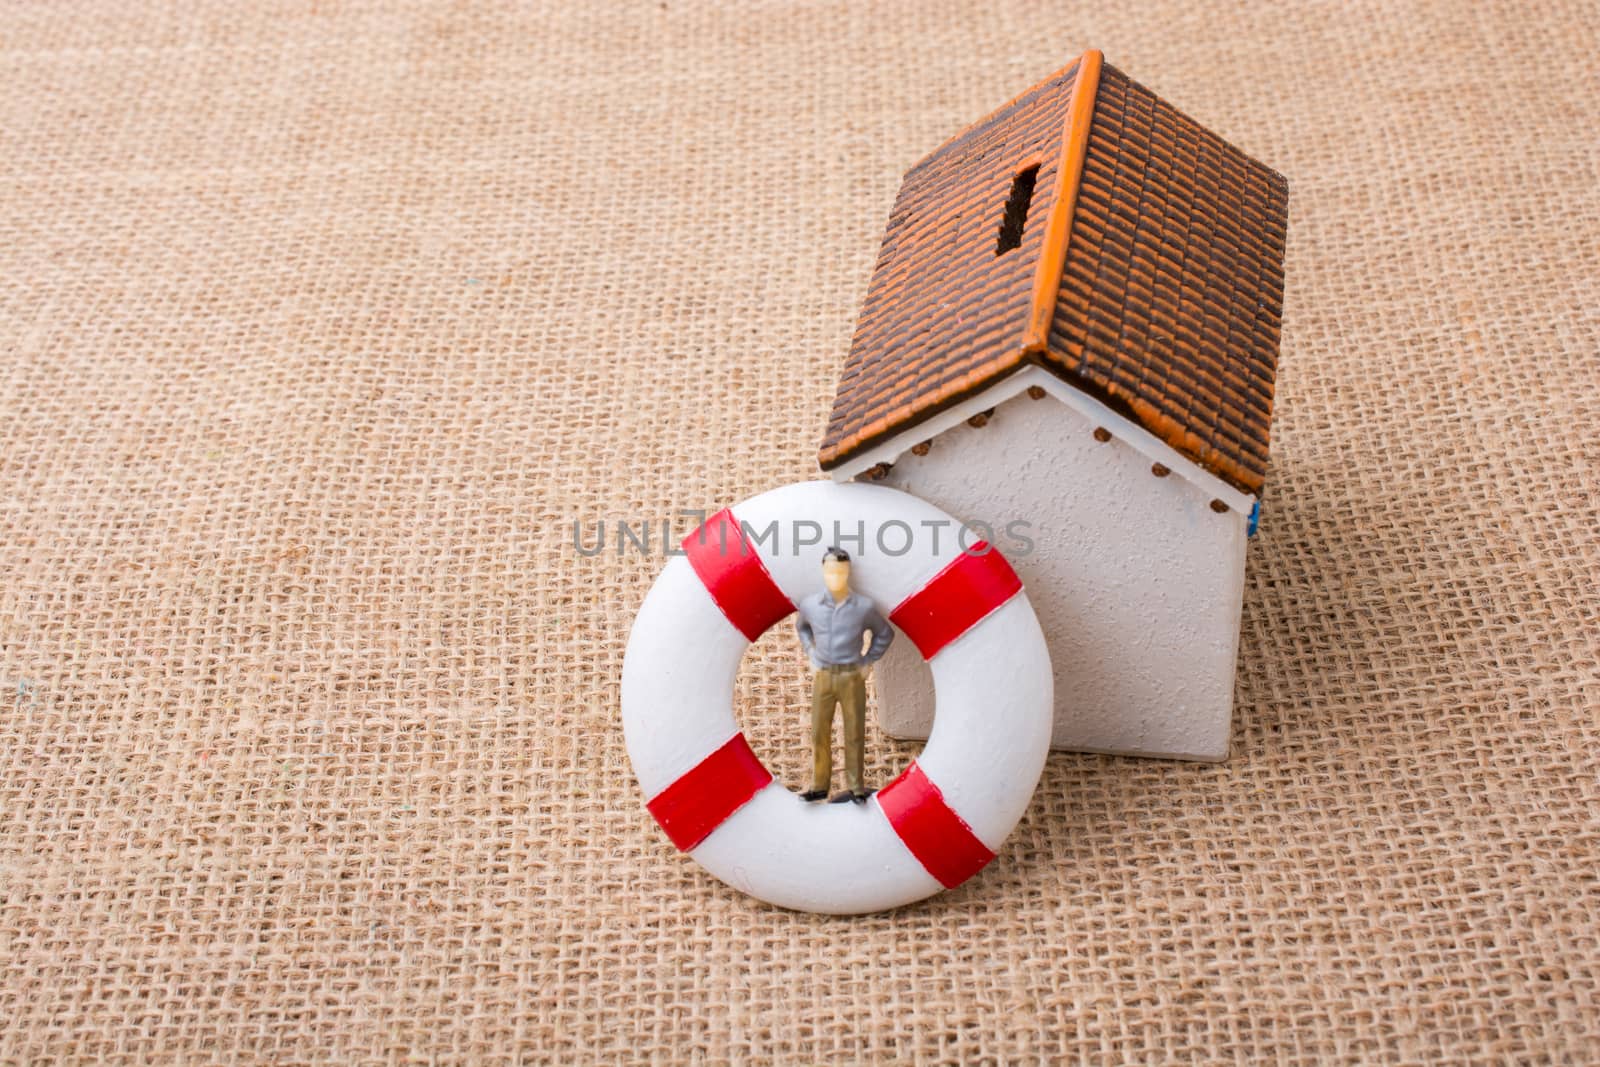 Model house and a life preserver with a man figure by berkay